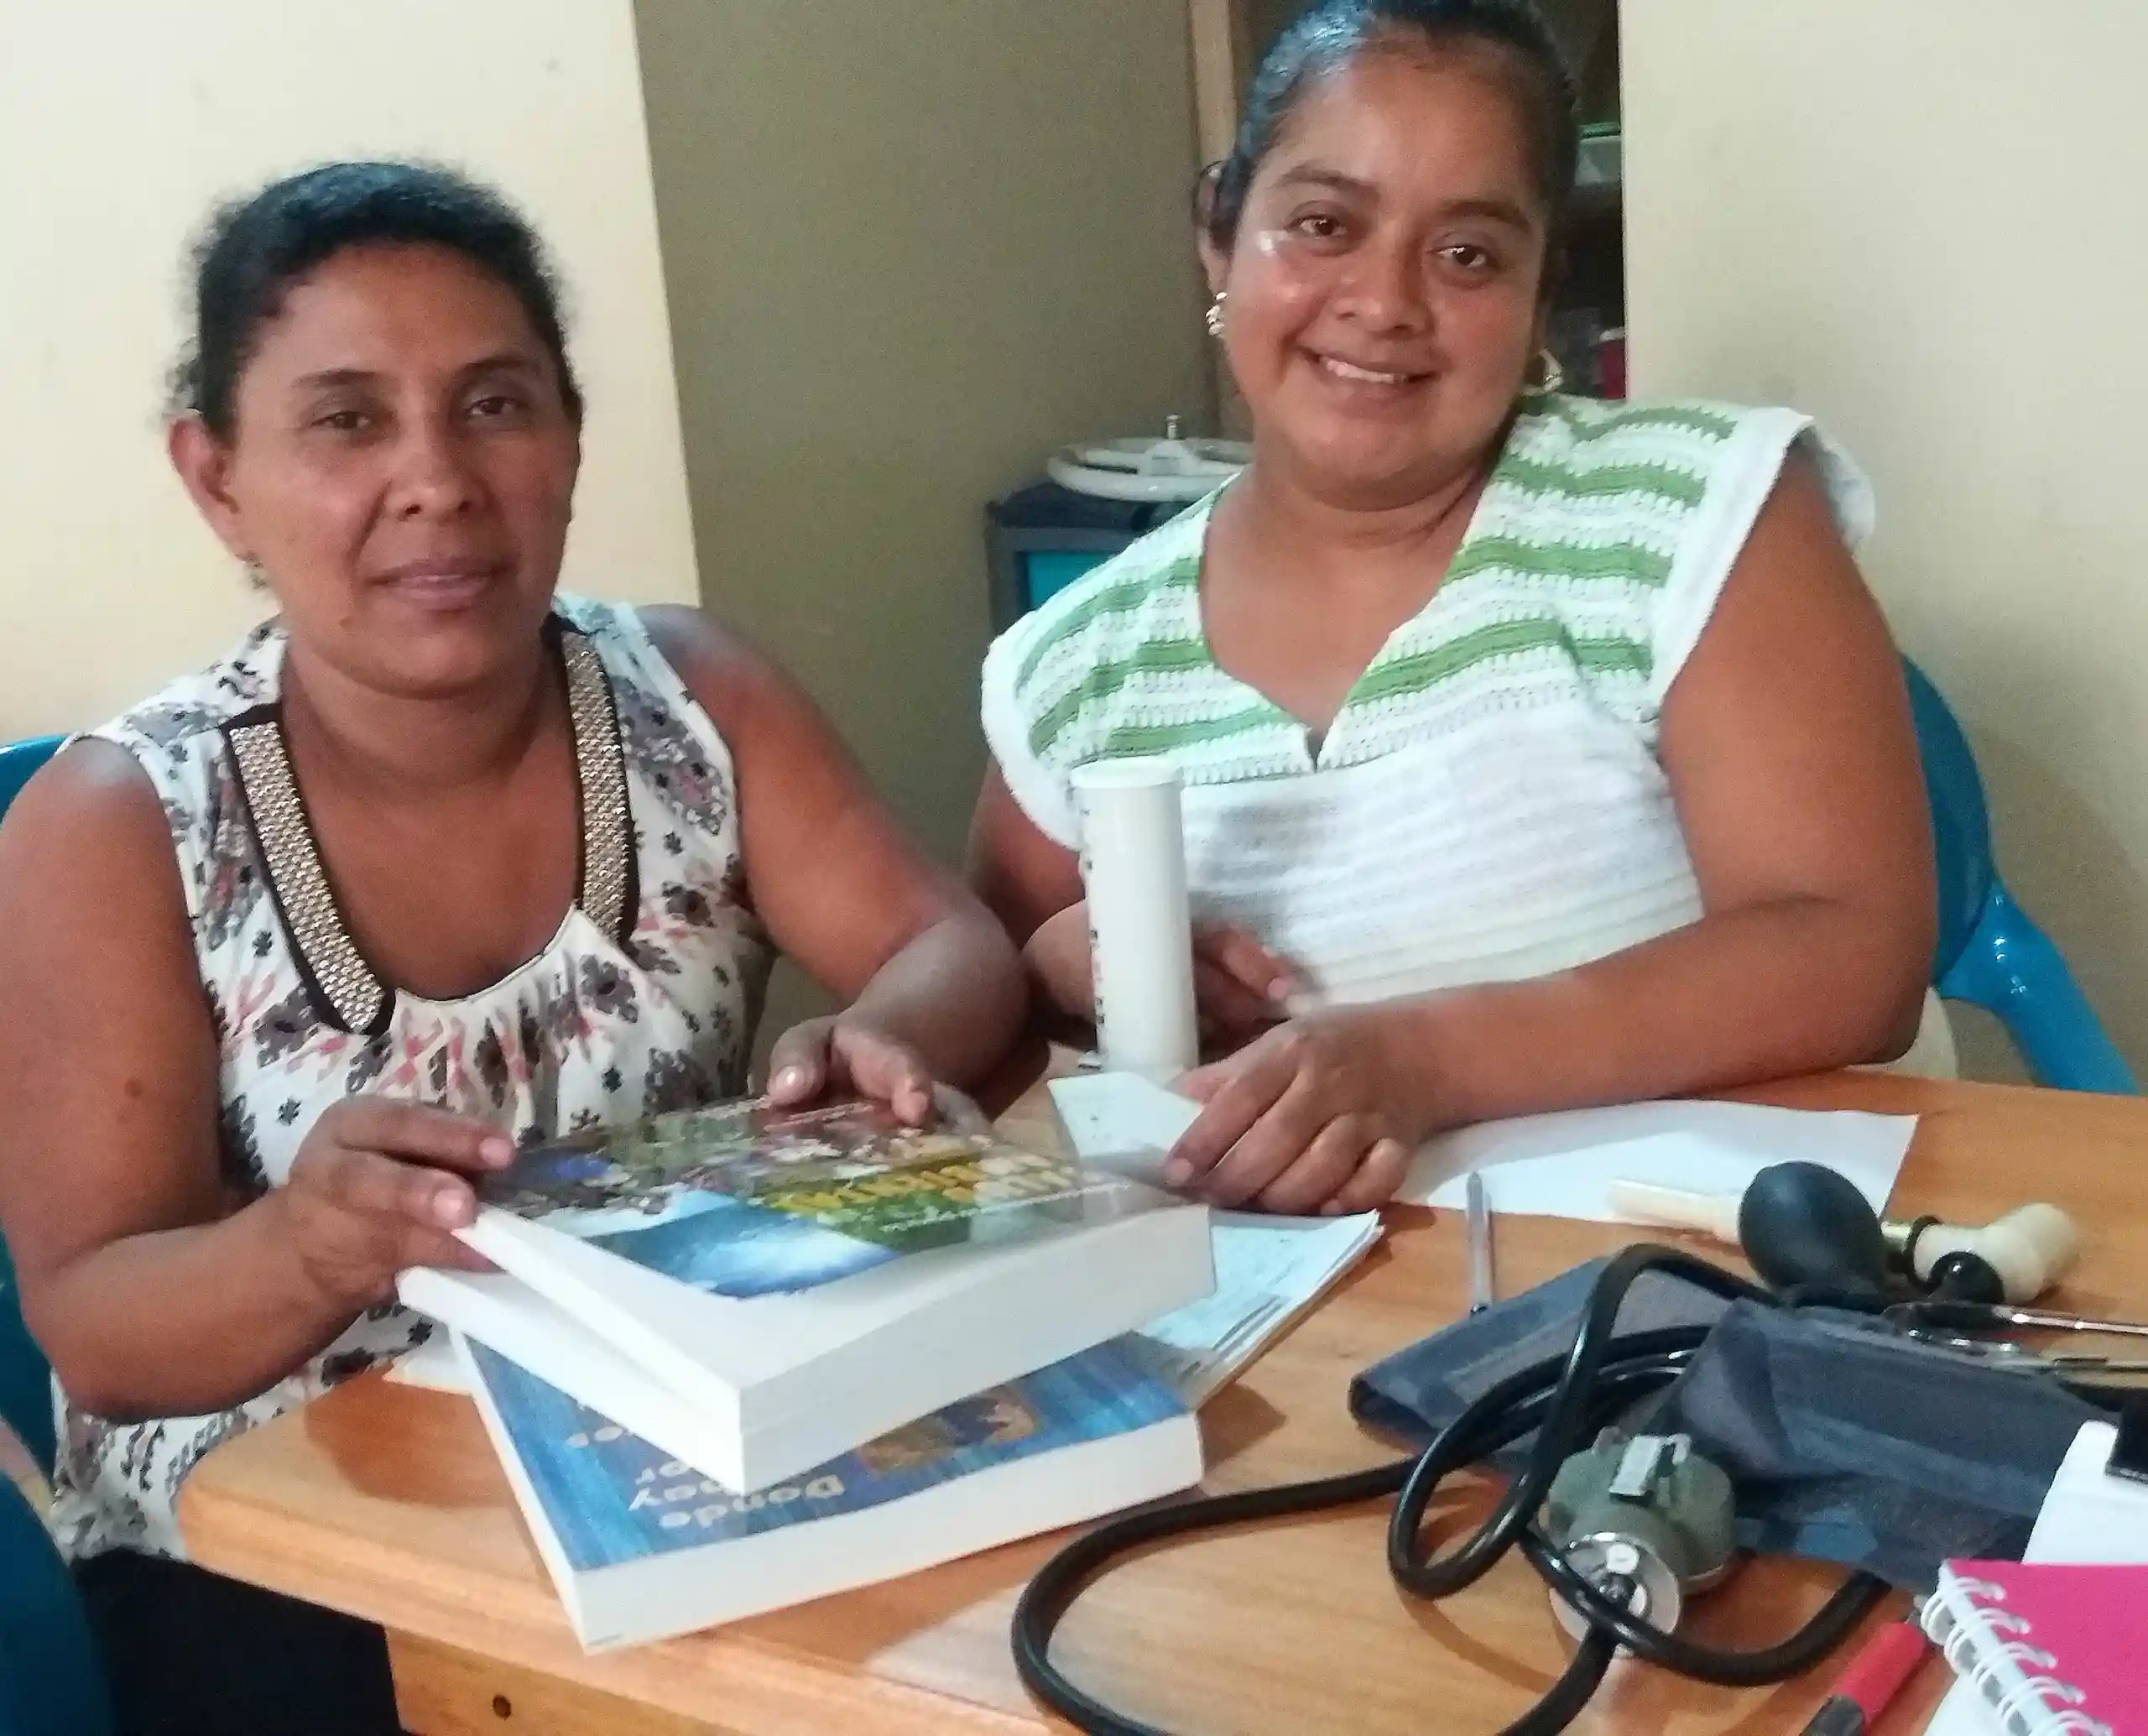 Two ASECSA workers sit at a desk and smile for the camera. Copies of Guía comunitaria para la salud ambiental and Donde no hay doctor sit on the desk in front of them. Stethoscopes are also on desk.